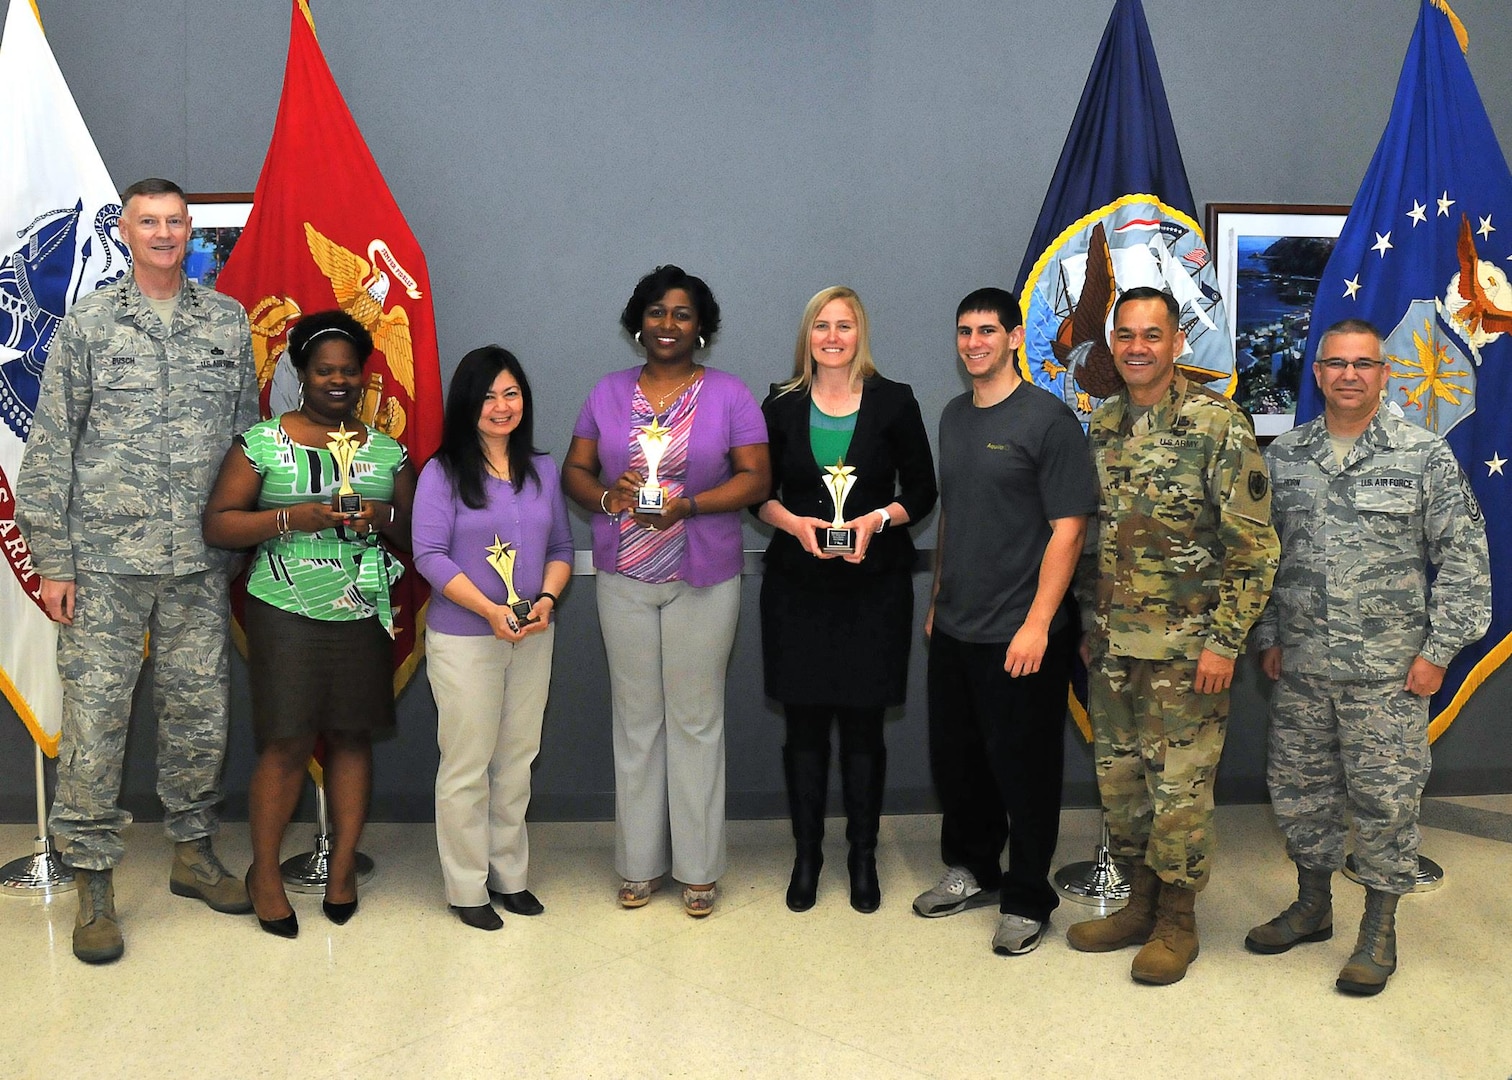 Senior leaders pose with "Ladies DSW 2.0," the first-place team, at the 2017 Winter Warrior Project awards ceremony, April 12, 2017, Fort Belvoir, Virginia. From left: DLA Director Air Force Lt. Gen. Andy Busch; Anita Elum-Mason; Rowena Estrada; Ahawana Williams; Christina Darensbourg; team coach Demetrios Danis; Army Command Sgt. Major Charles Tobin, DLA senior enlisted leader; Air Force Chief Master Sgt. Timothy Horn, DTRA senior enlisted leader.